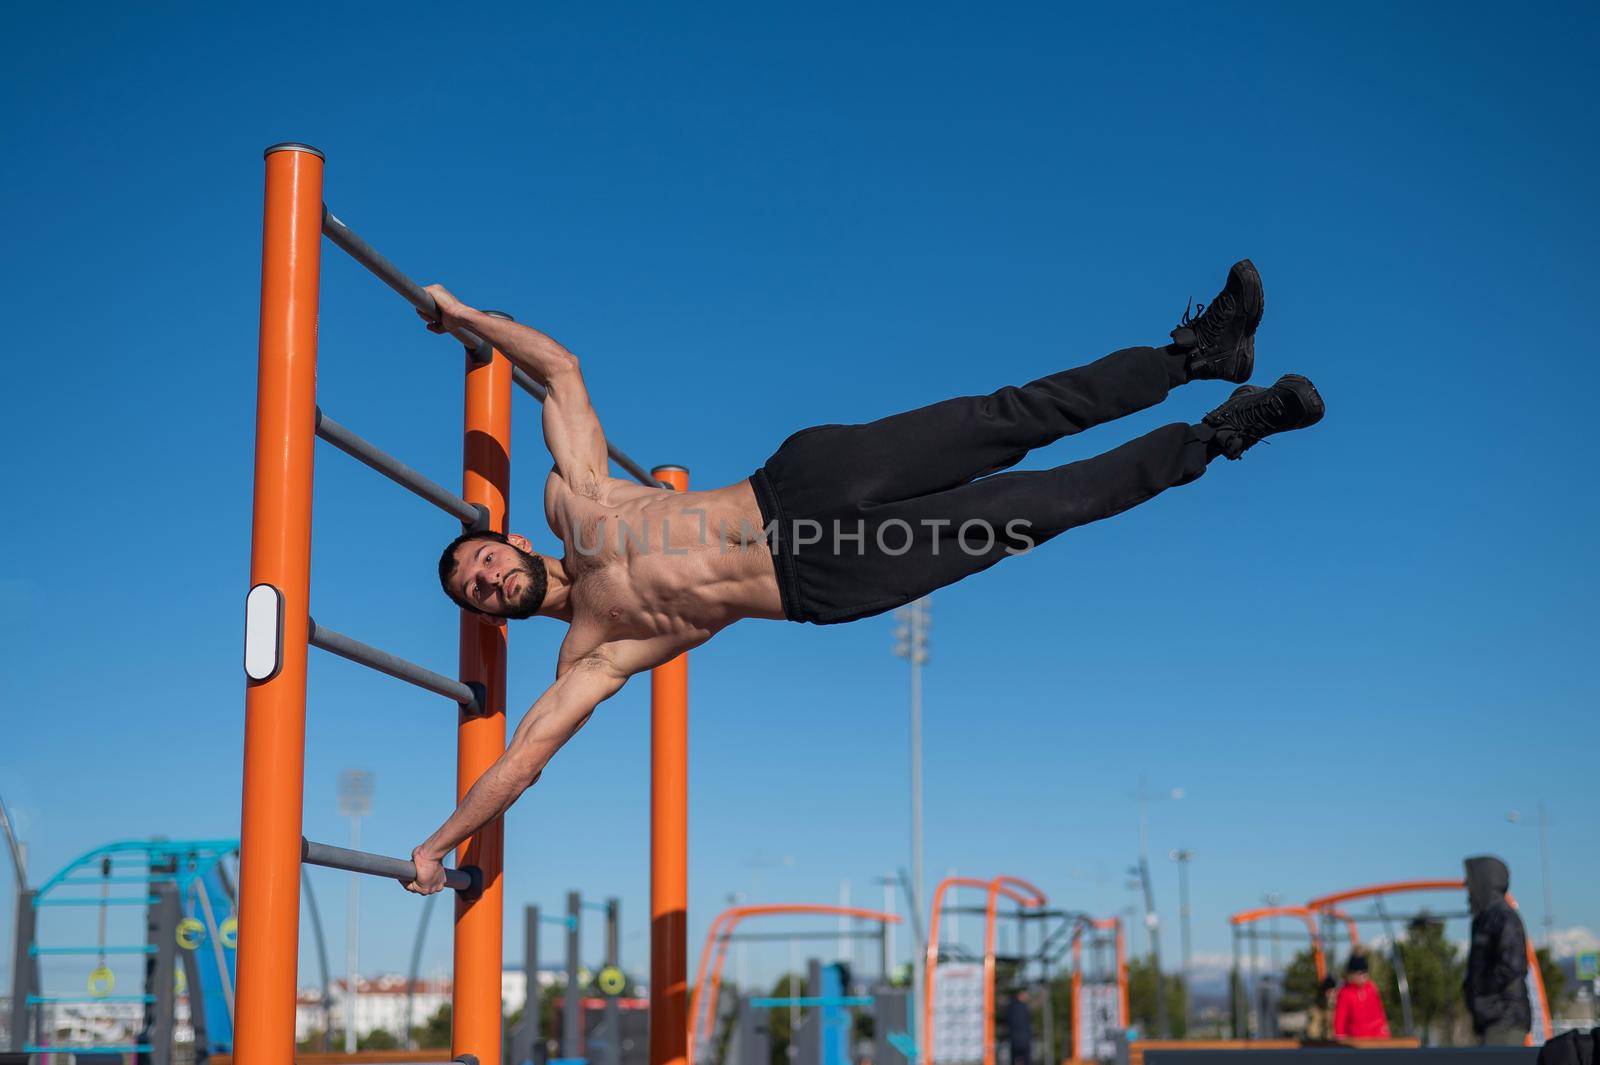 Shirtless man doing human flag outdoors. by mrwed54